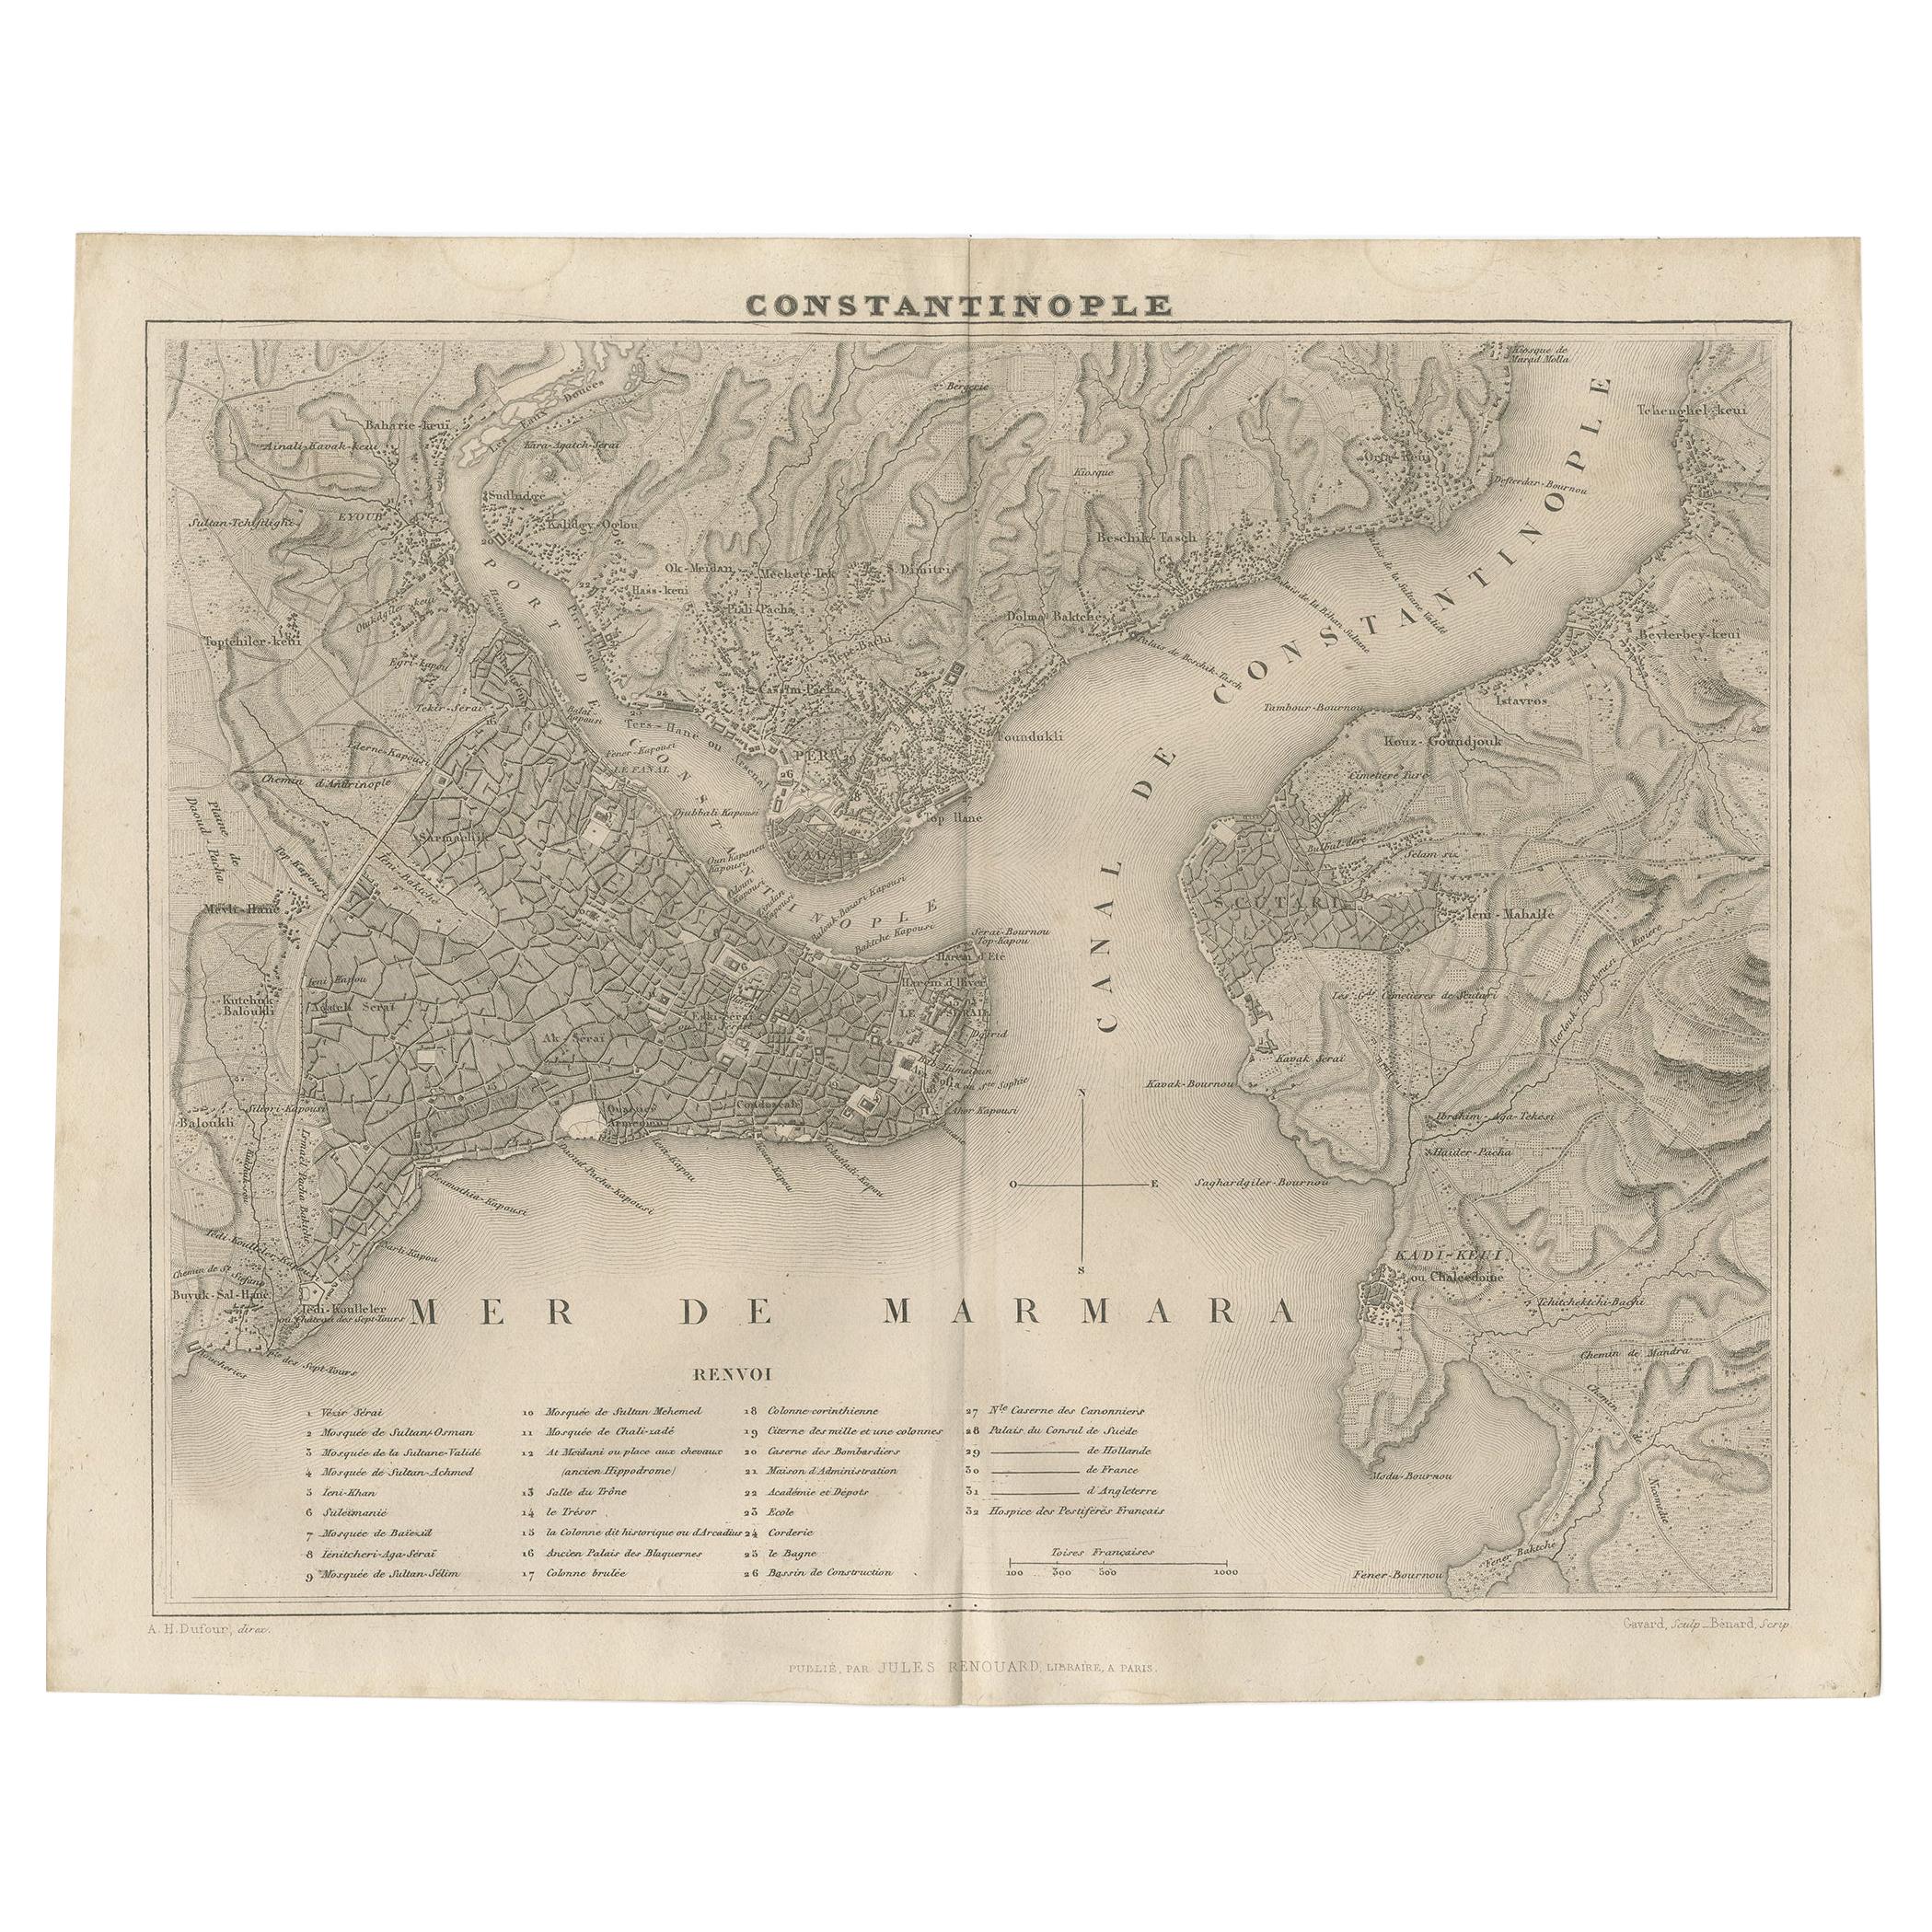 Antique Map of Constantinople and Surroundings by Balbi '1847'